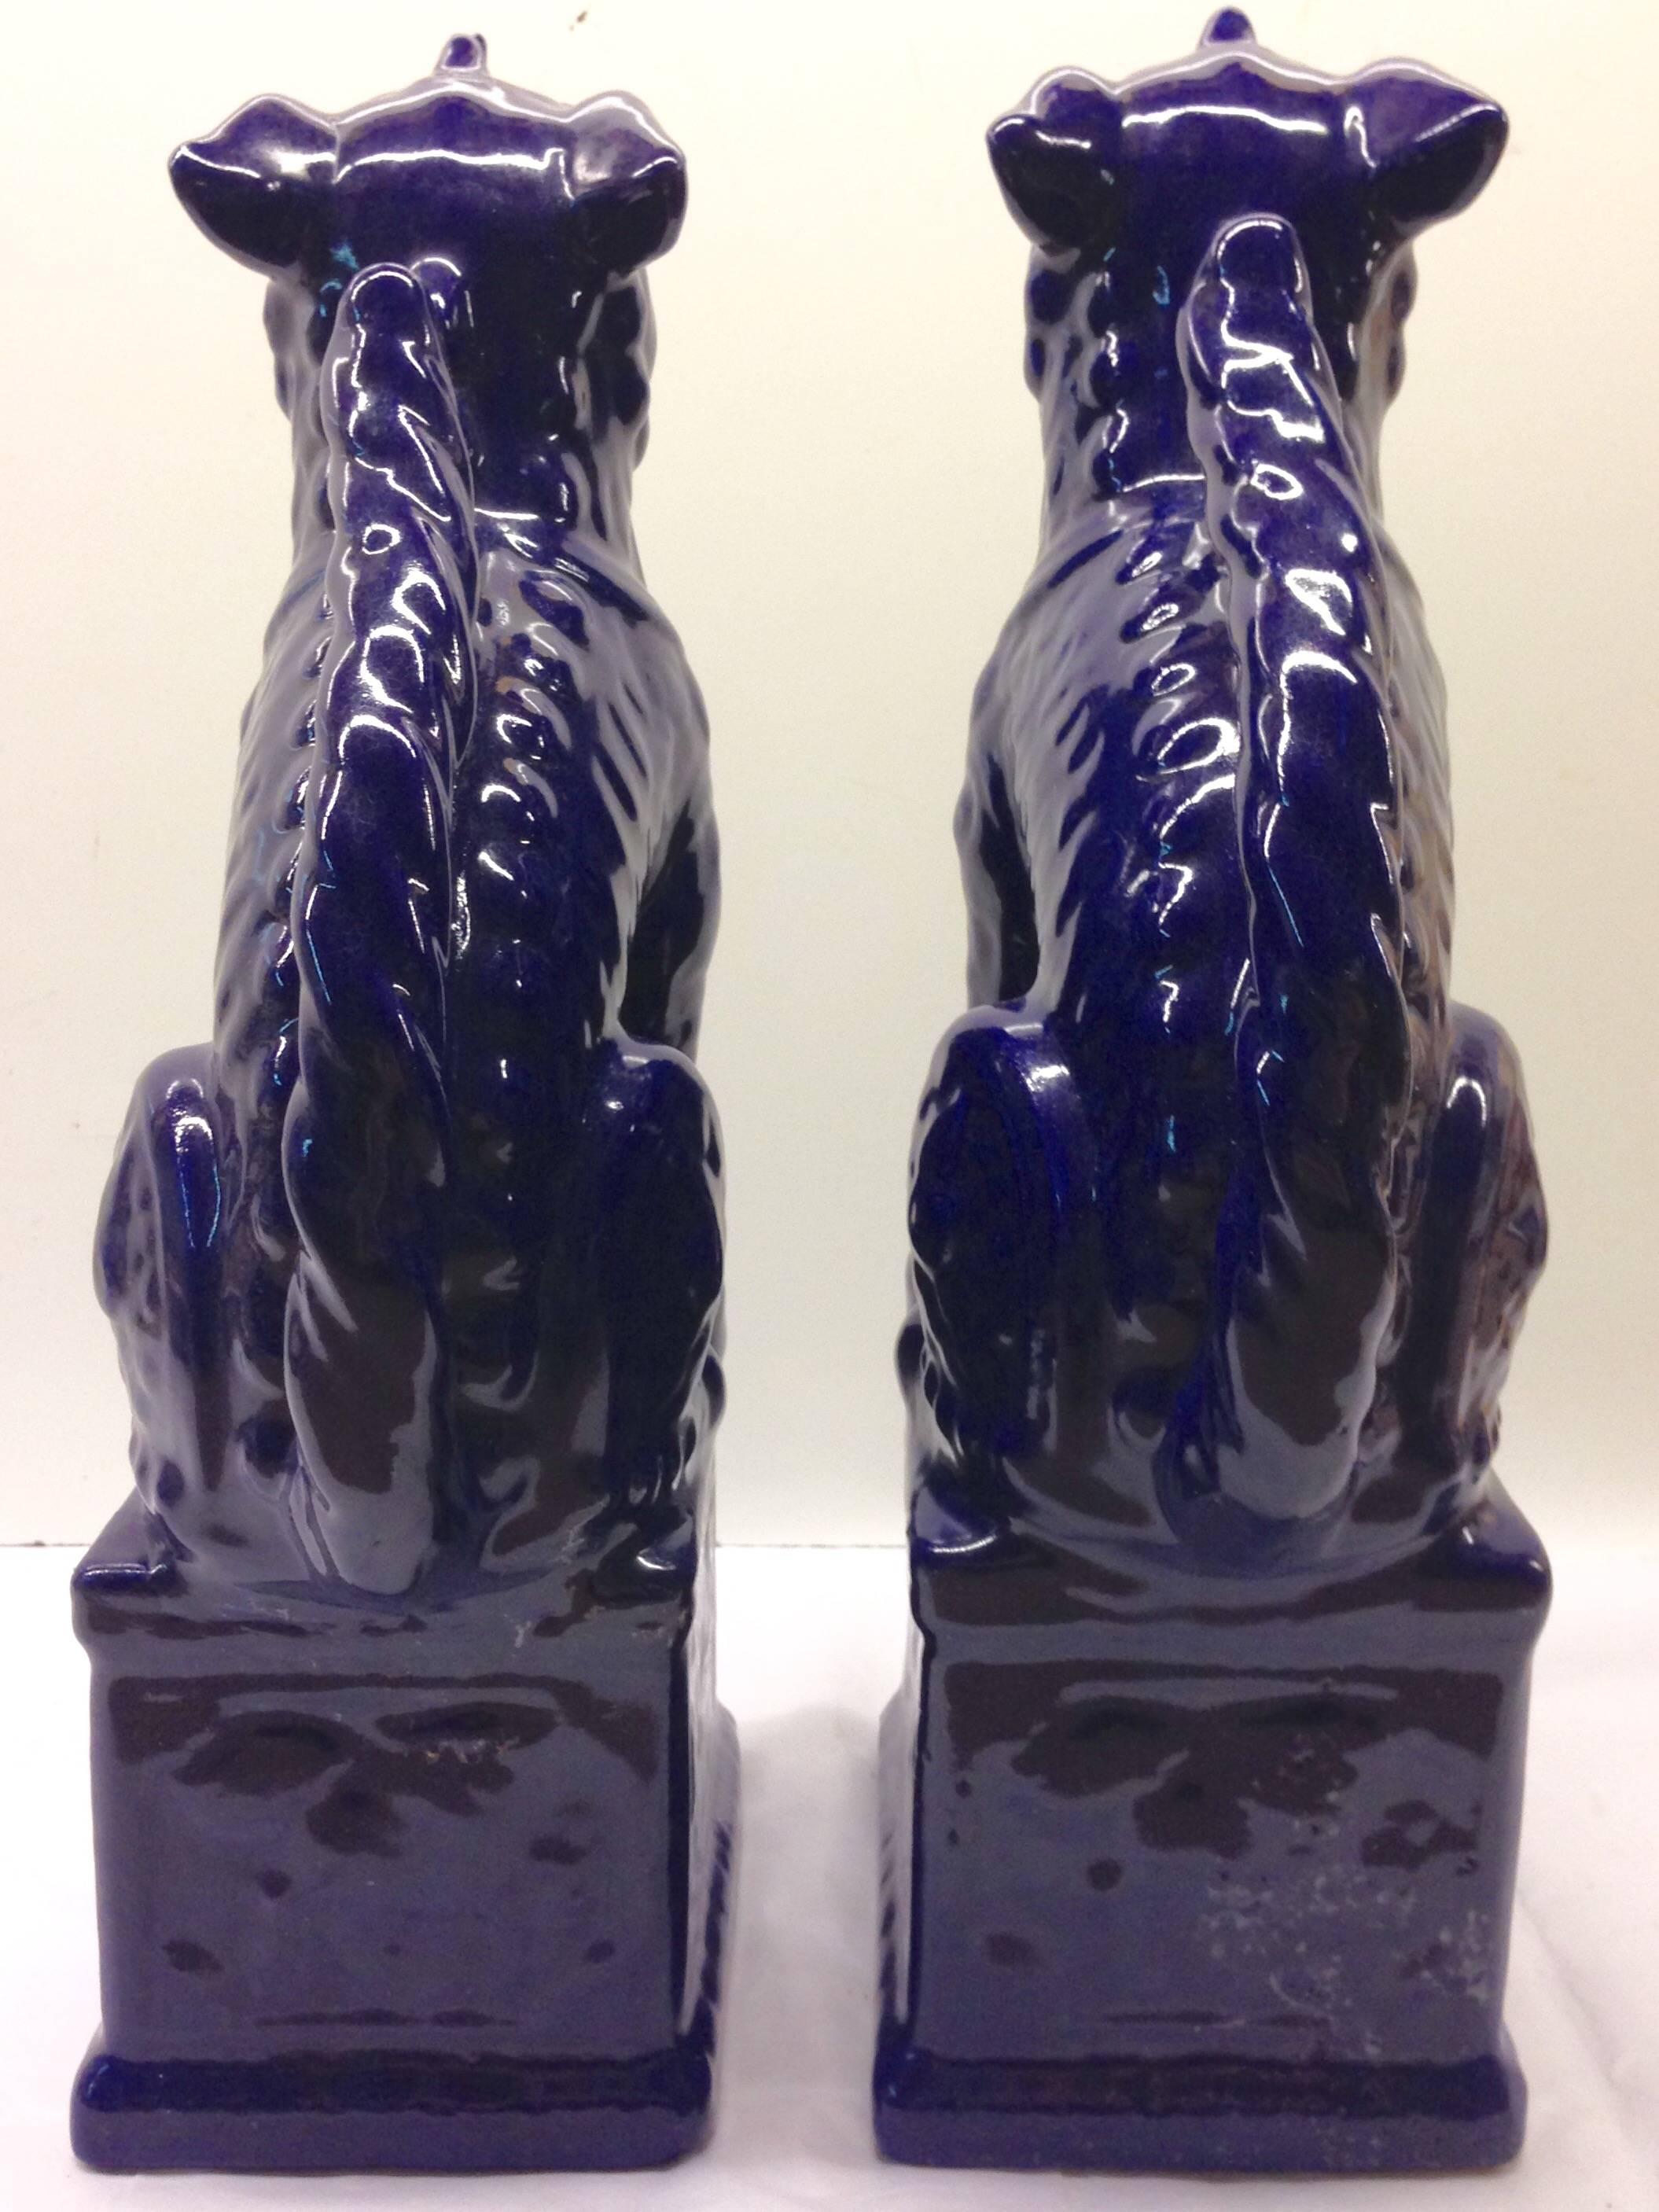 Contemporary pair of Chinese Foo Lion sculptures. These tall vibrant cobalt foo dog sculputres are made of glazed ceramic and are a high gloss finish.